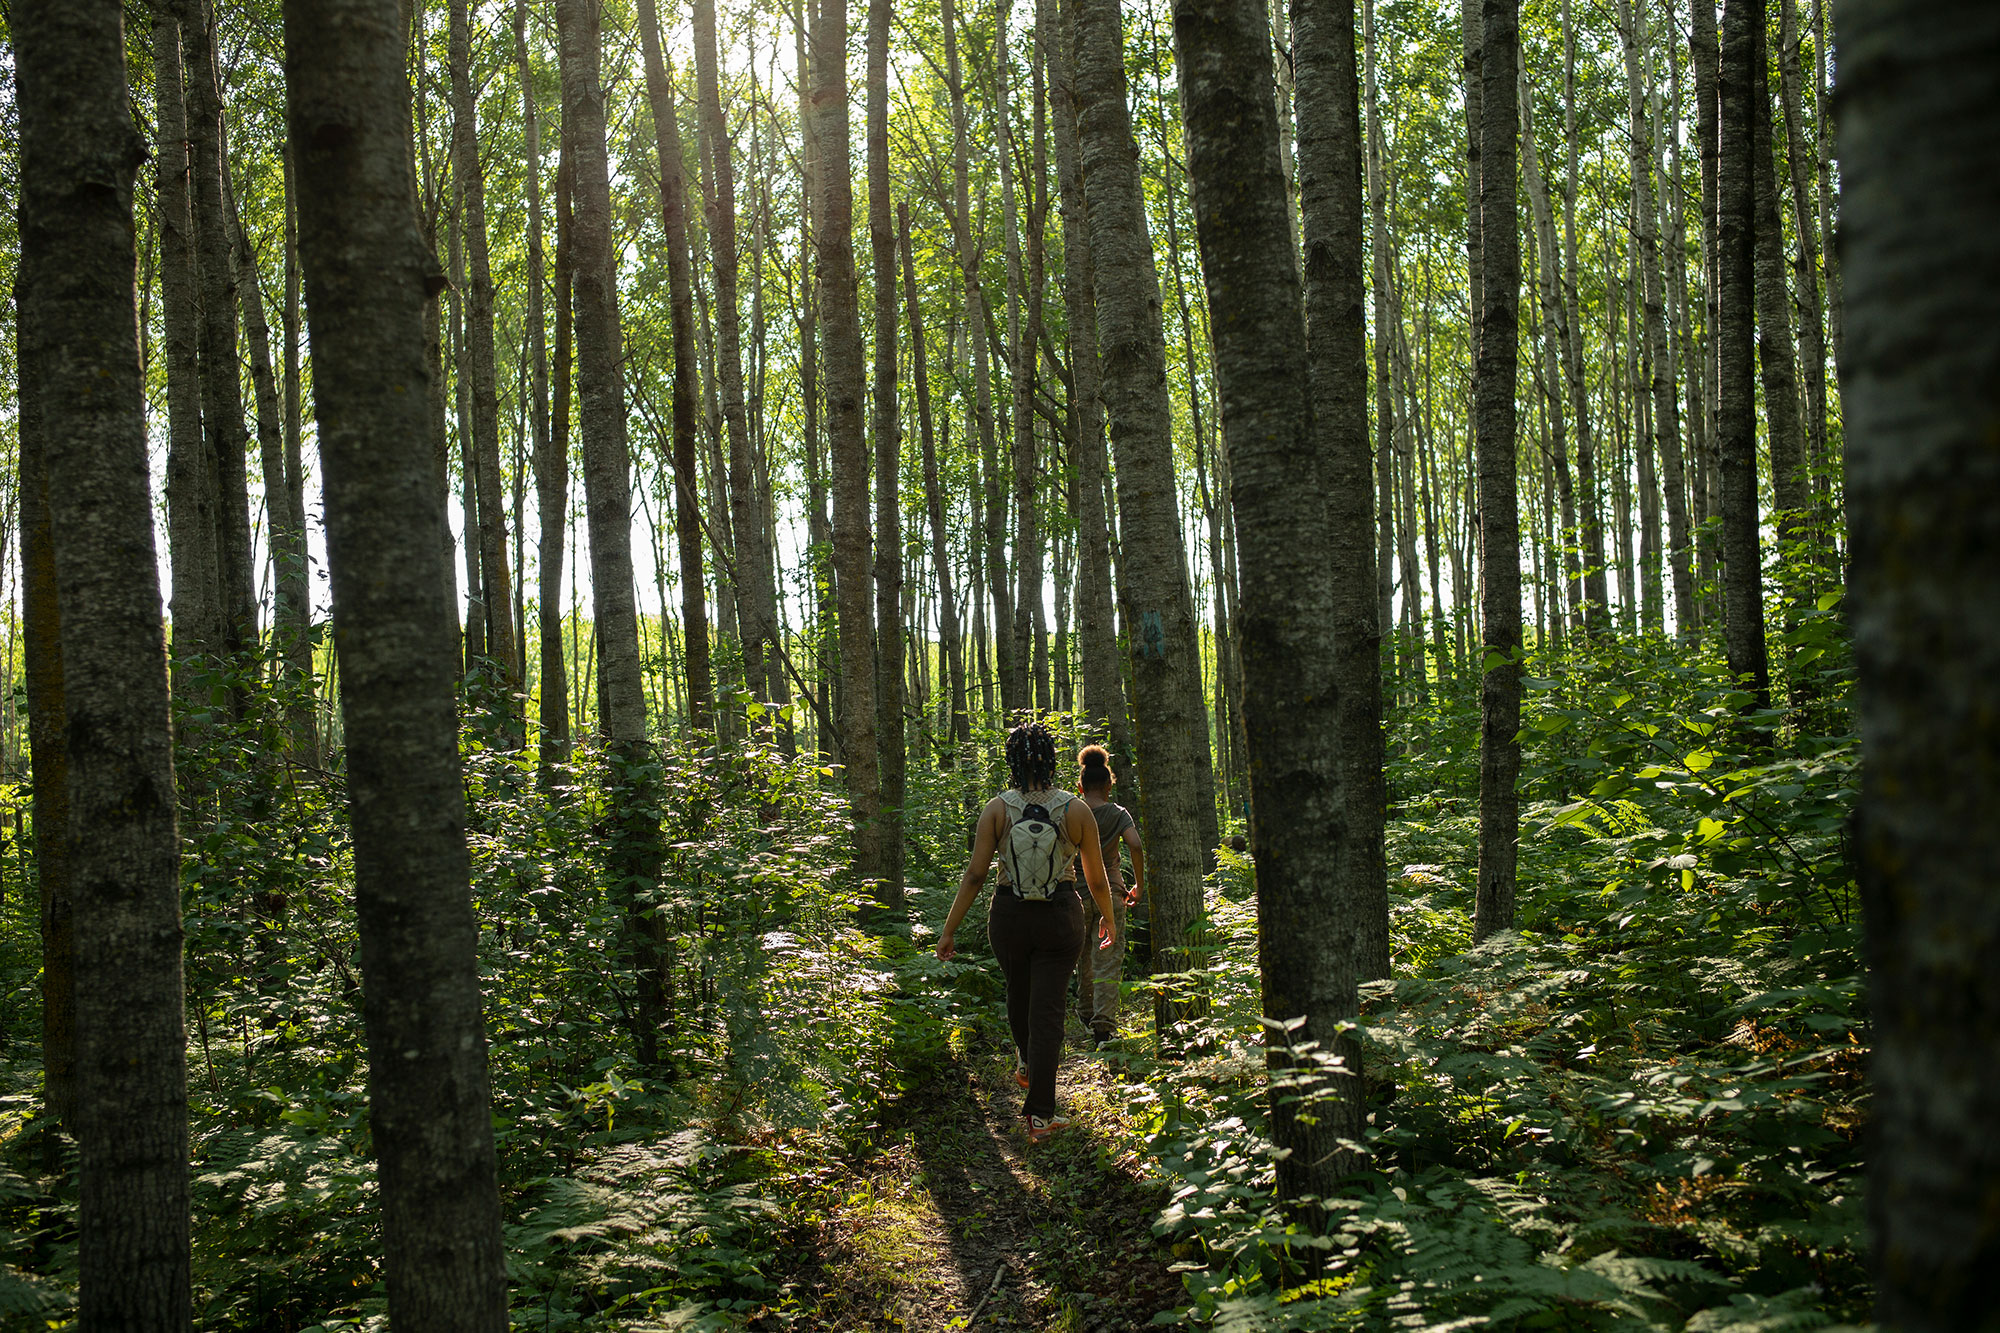 A person walking through a forest.